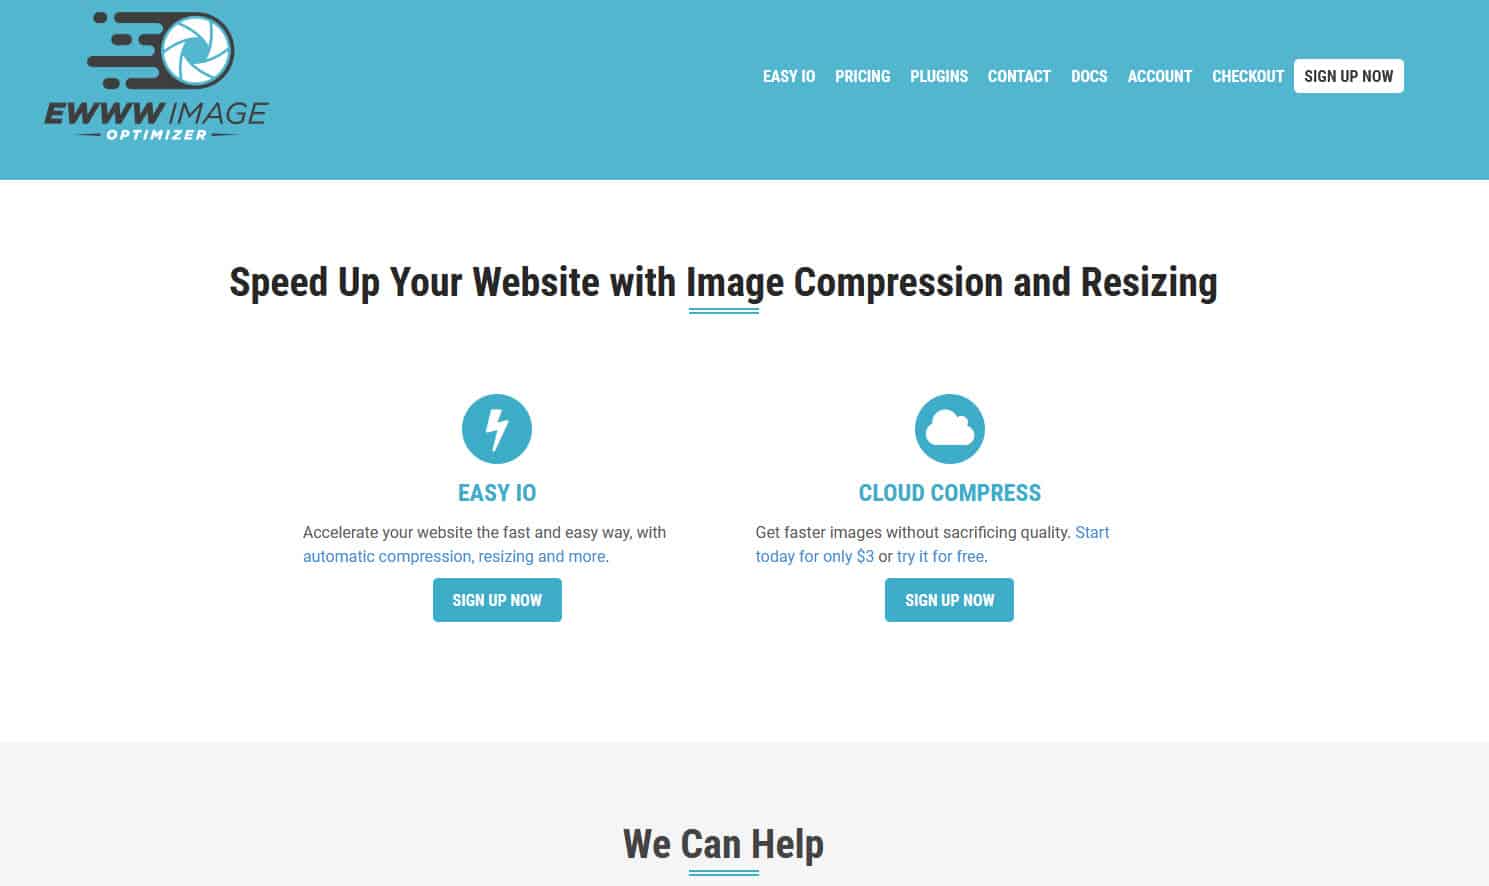 A photo of the EWWW Image Optimizer homepage